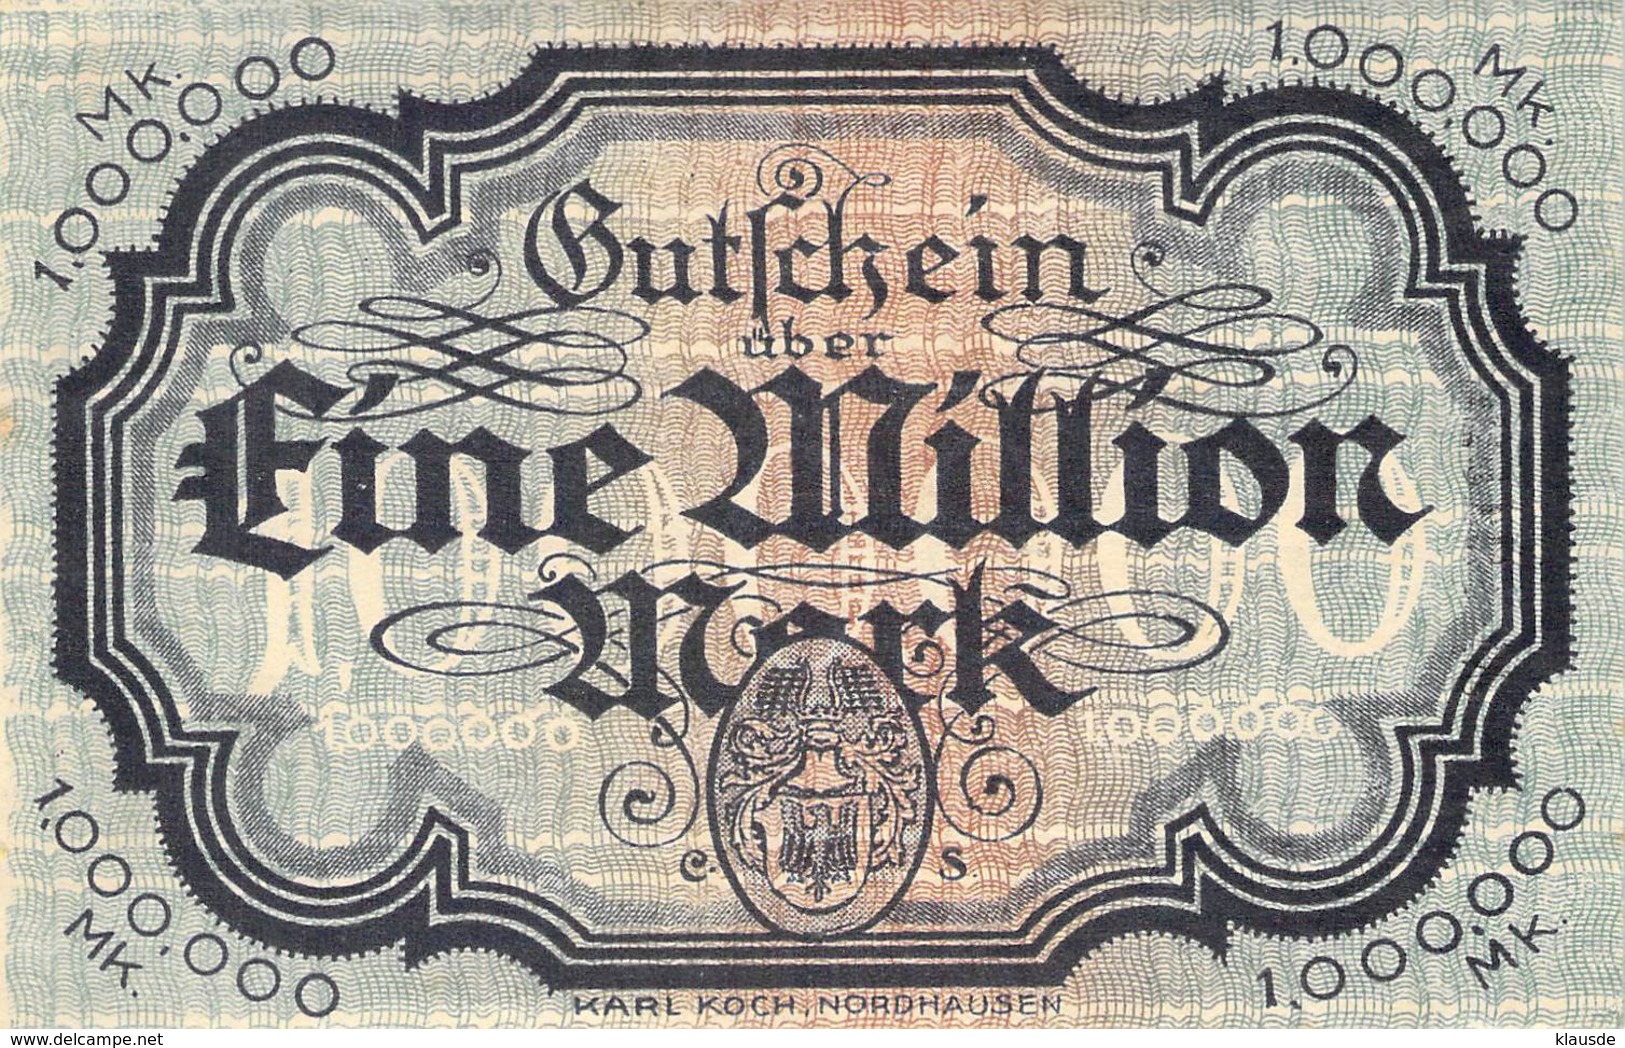 1 Mio Stadt Nordhausen UNC (I) - [11] Local Banknote Issues